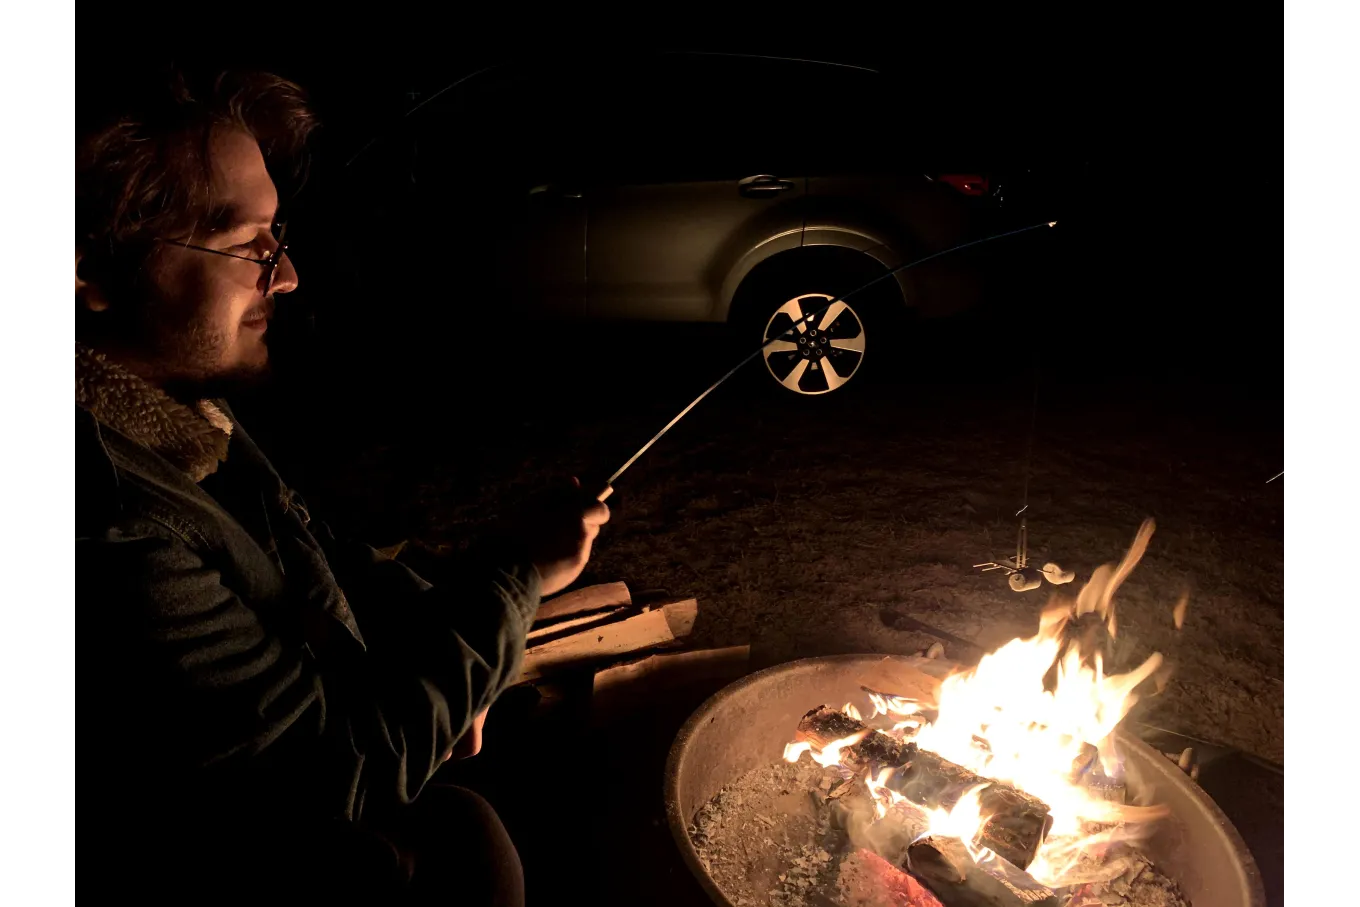 Photo of a man roasting marshmallows over a campfire at night